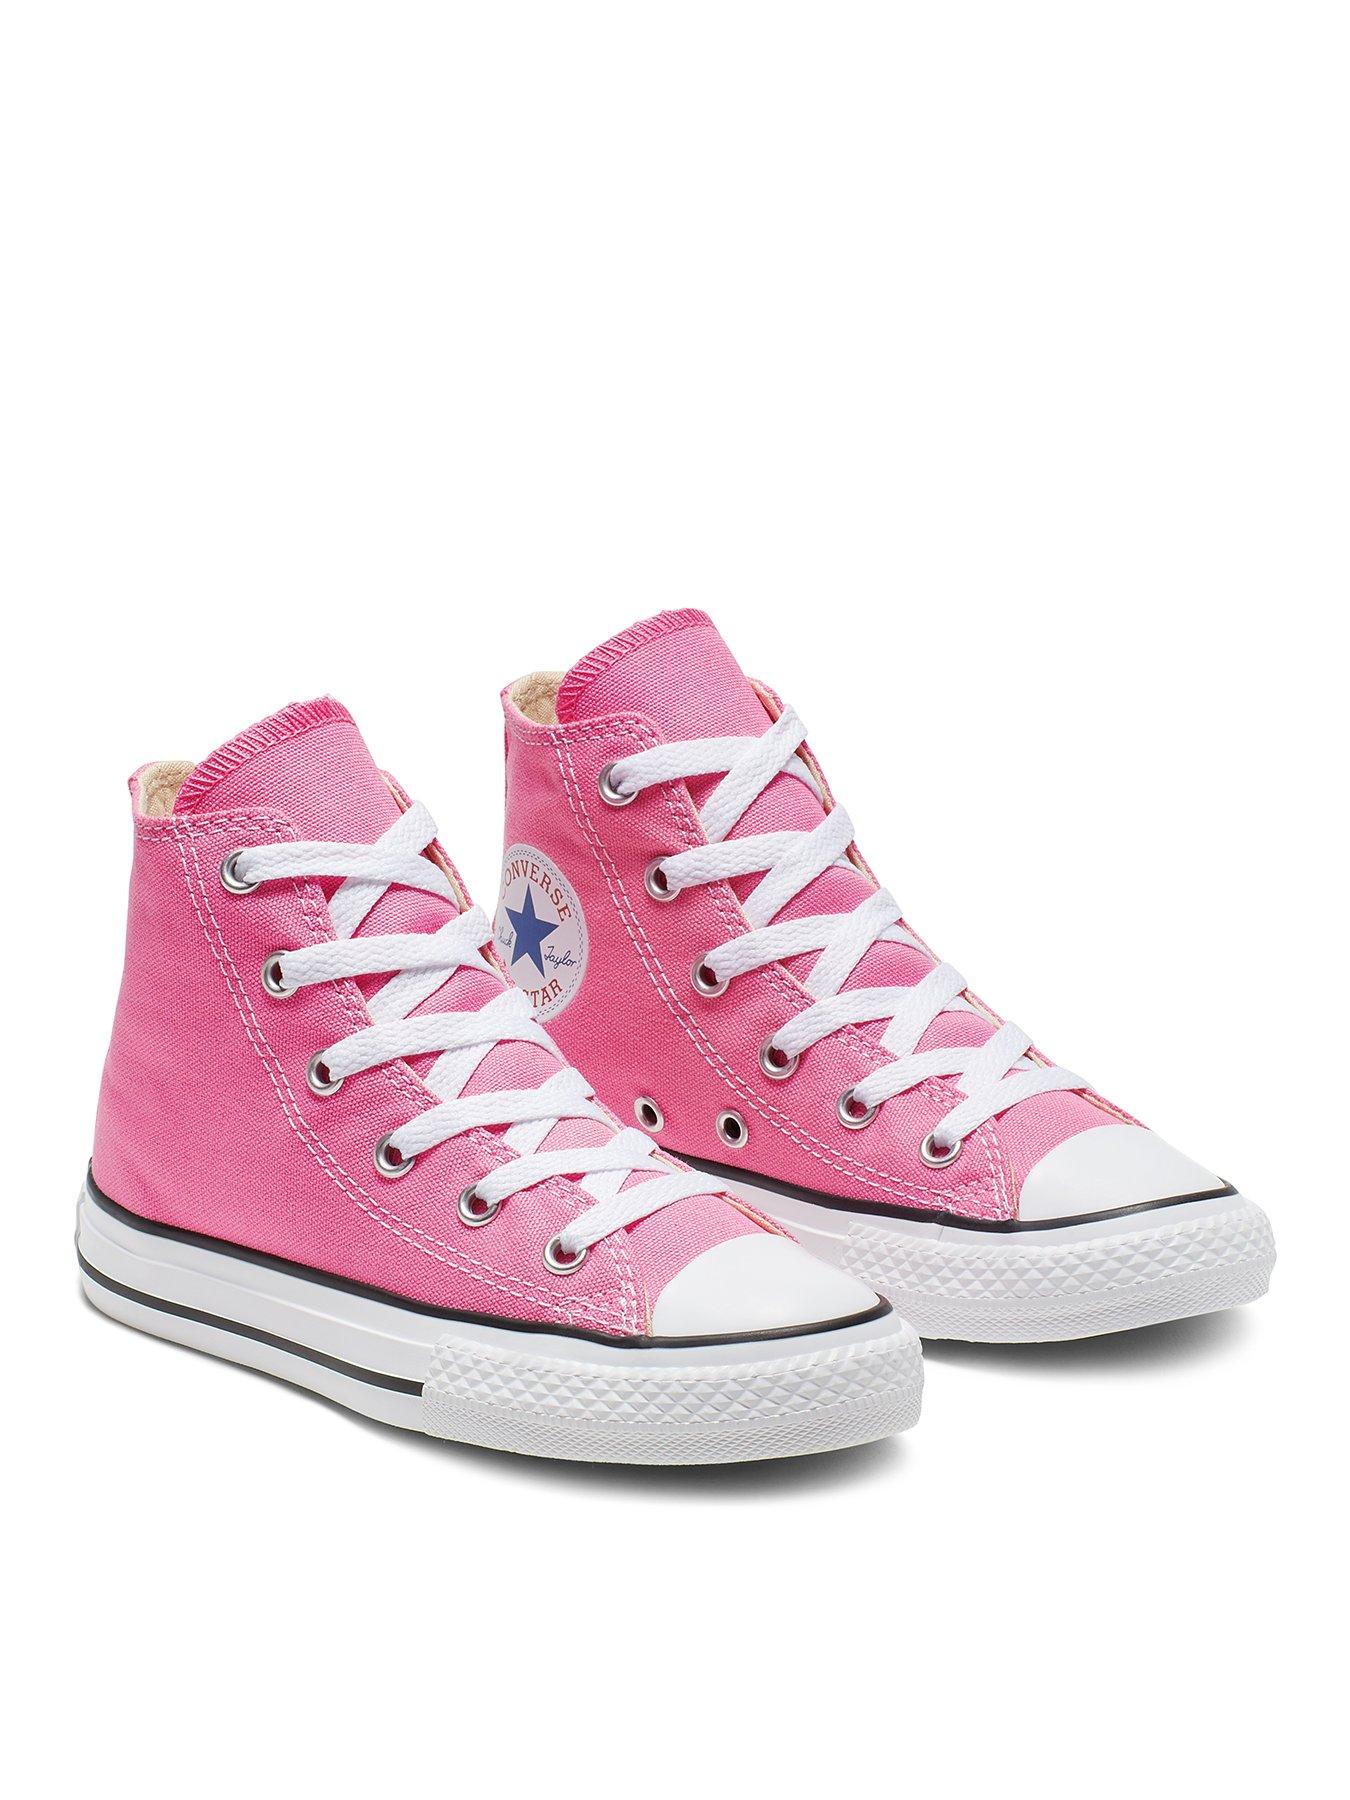  Chuck Taylor All Star Ox Childrens Girls Trainers -Pink